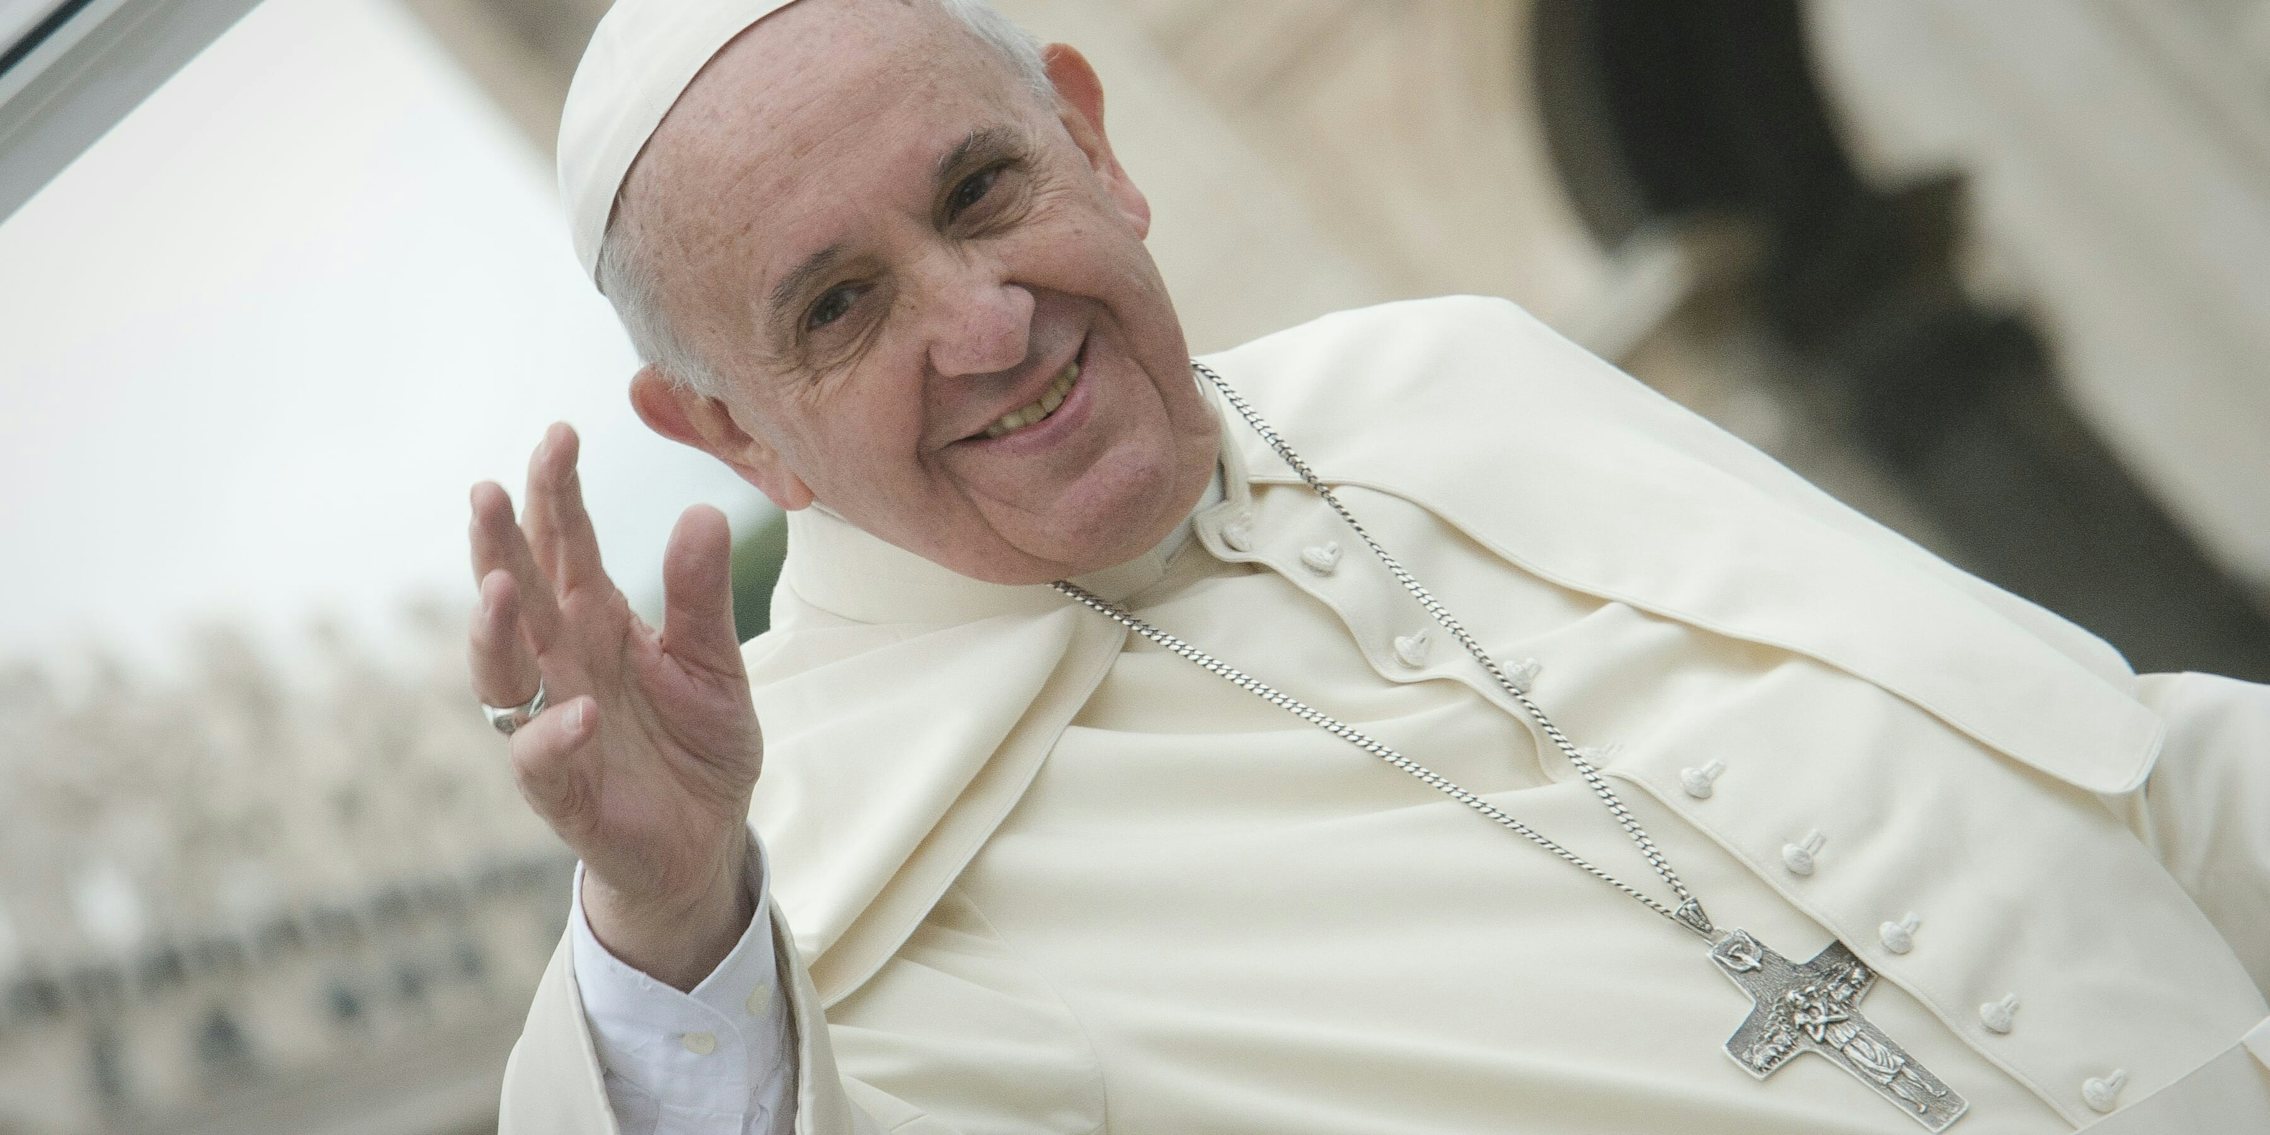 A gay man claims Pope Francis said God 'made you this way.'